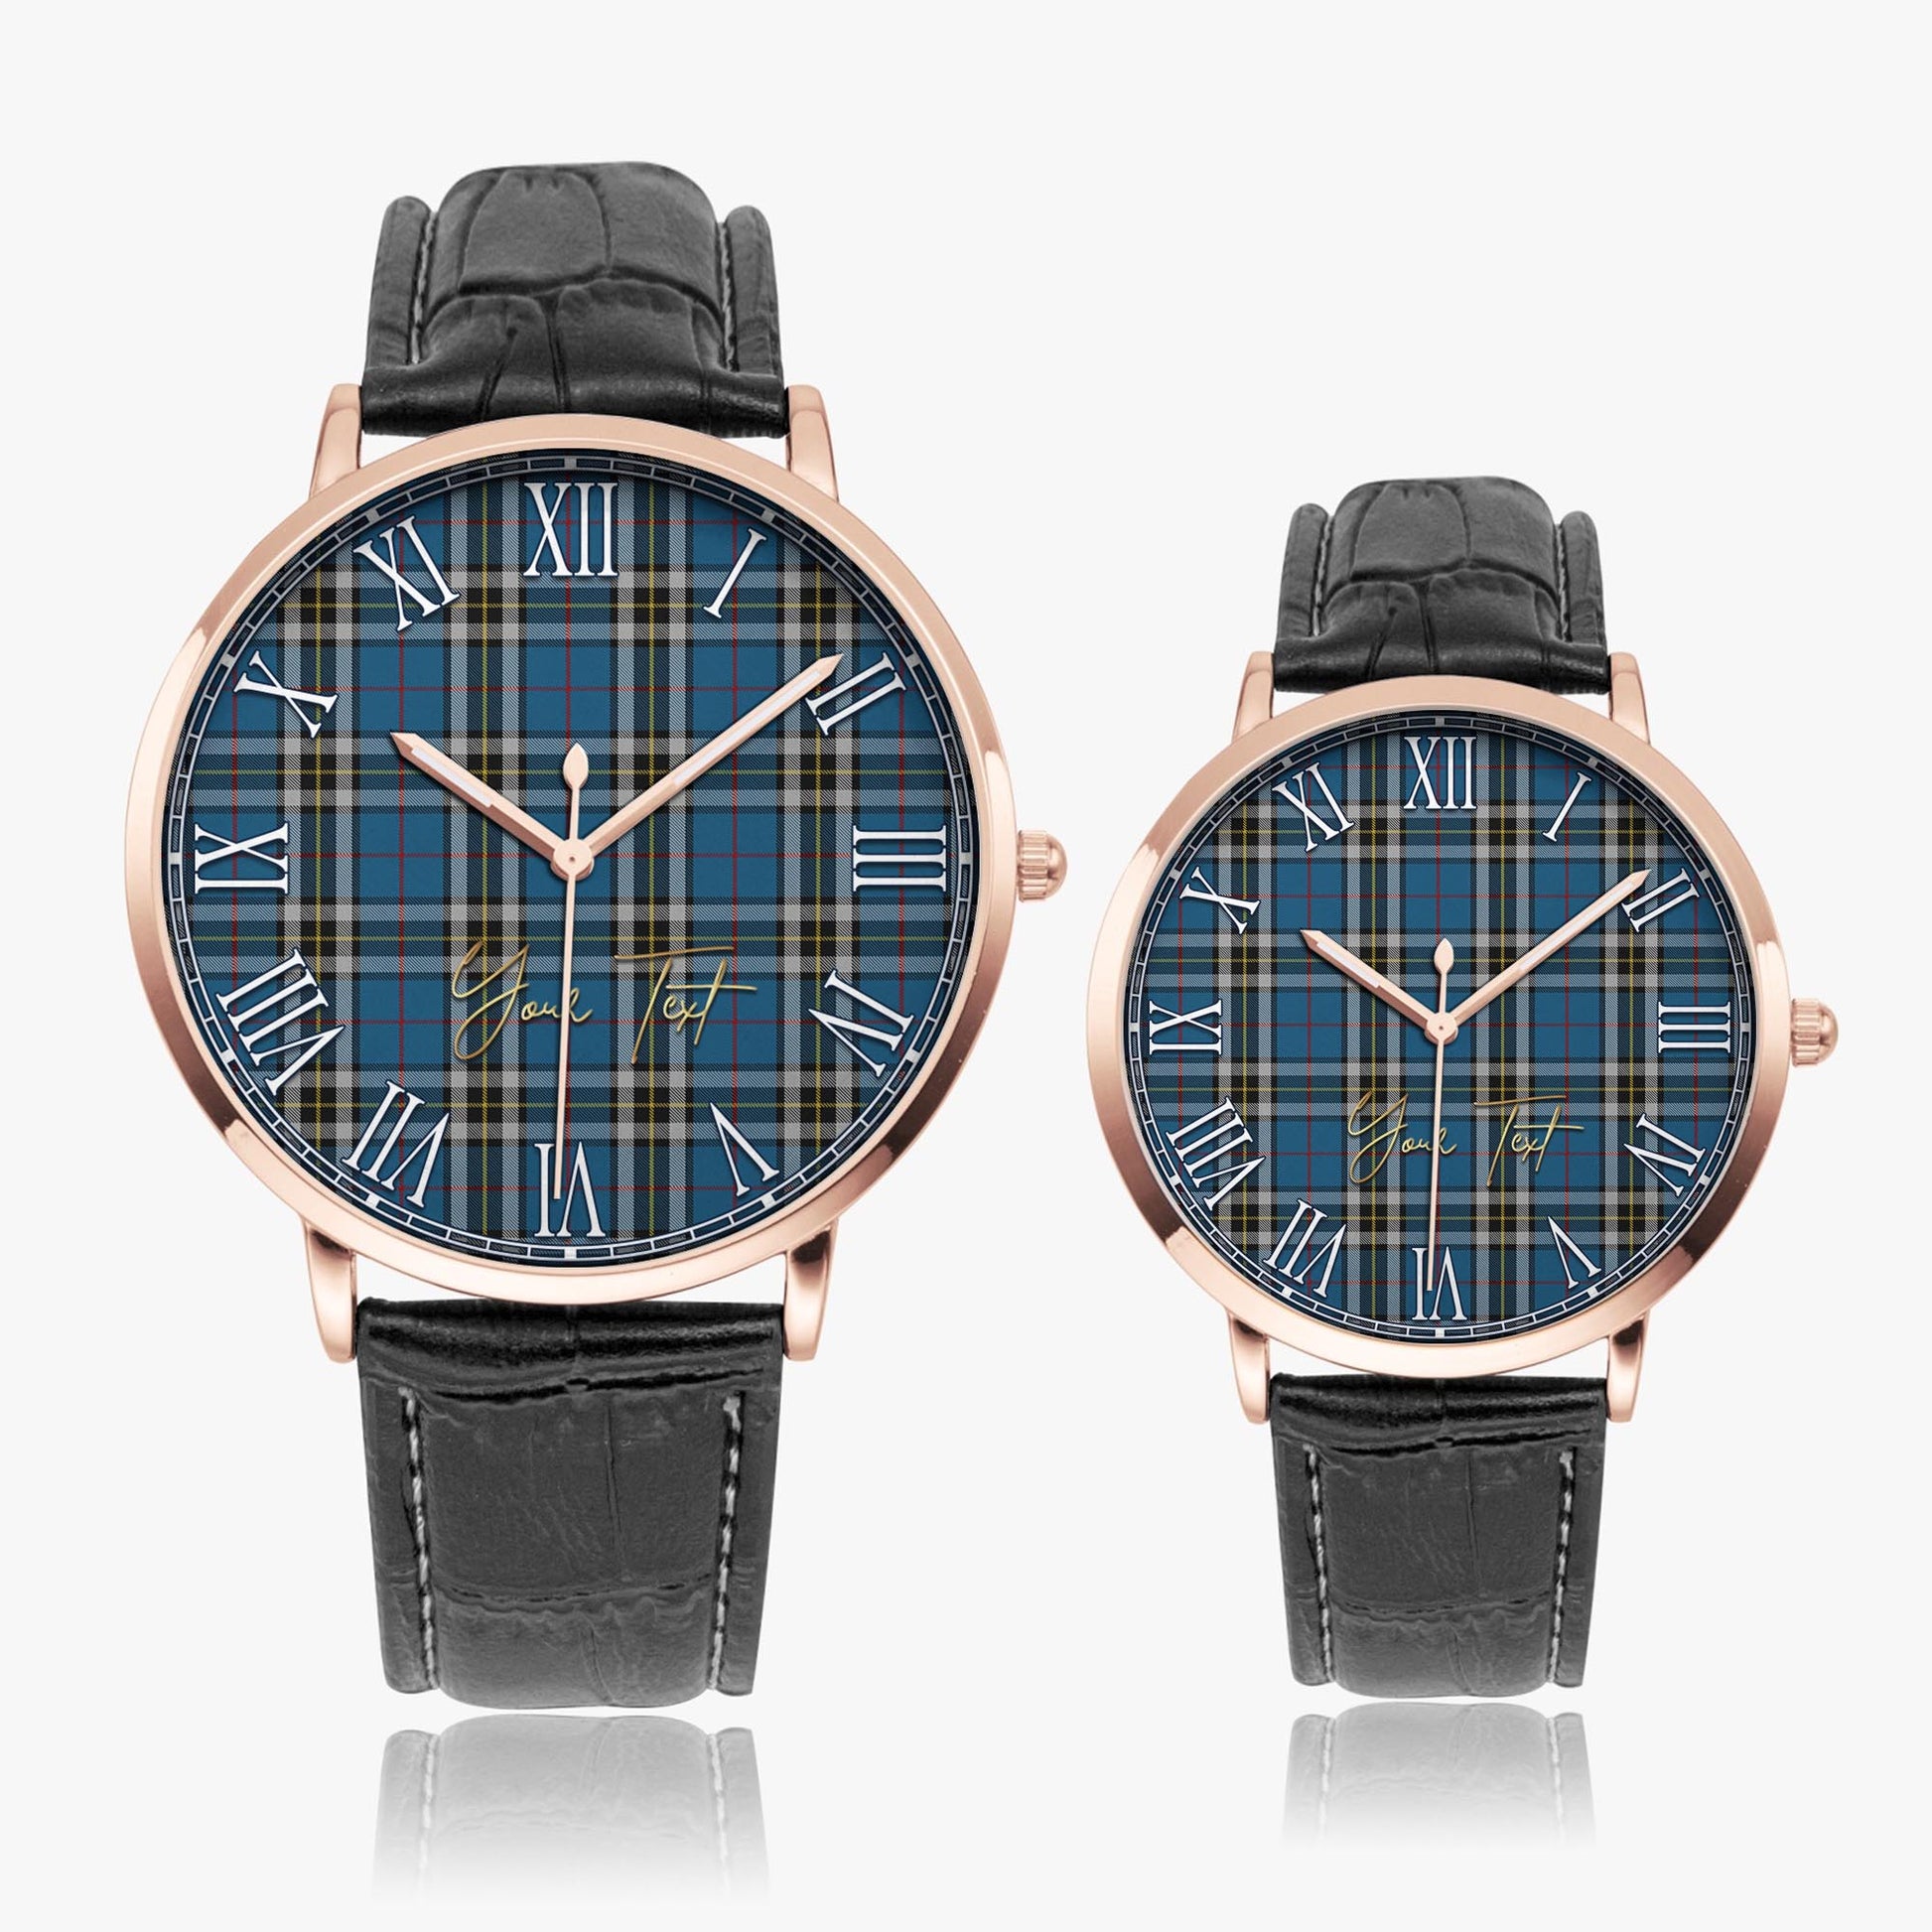 Thomson Dress Blue Tartan Personalized Your Text Leather Trap Quartz Watch Ultra Thin Rose Gold Case With Black Leather Strap - Tartanvibesclothing Shop